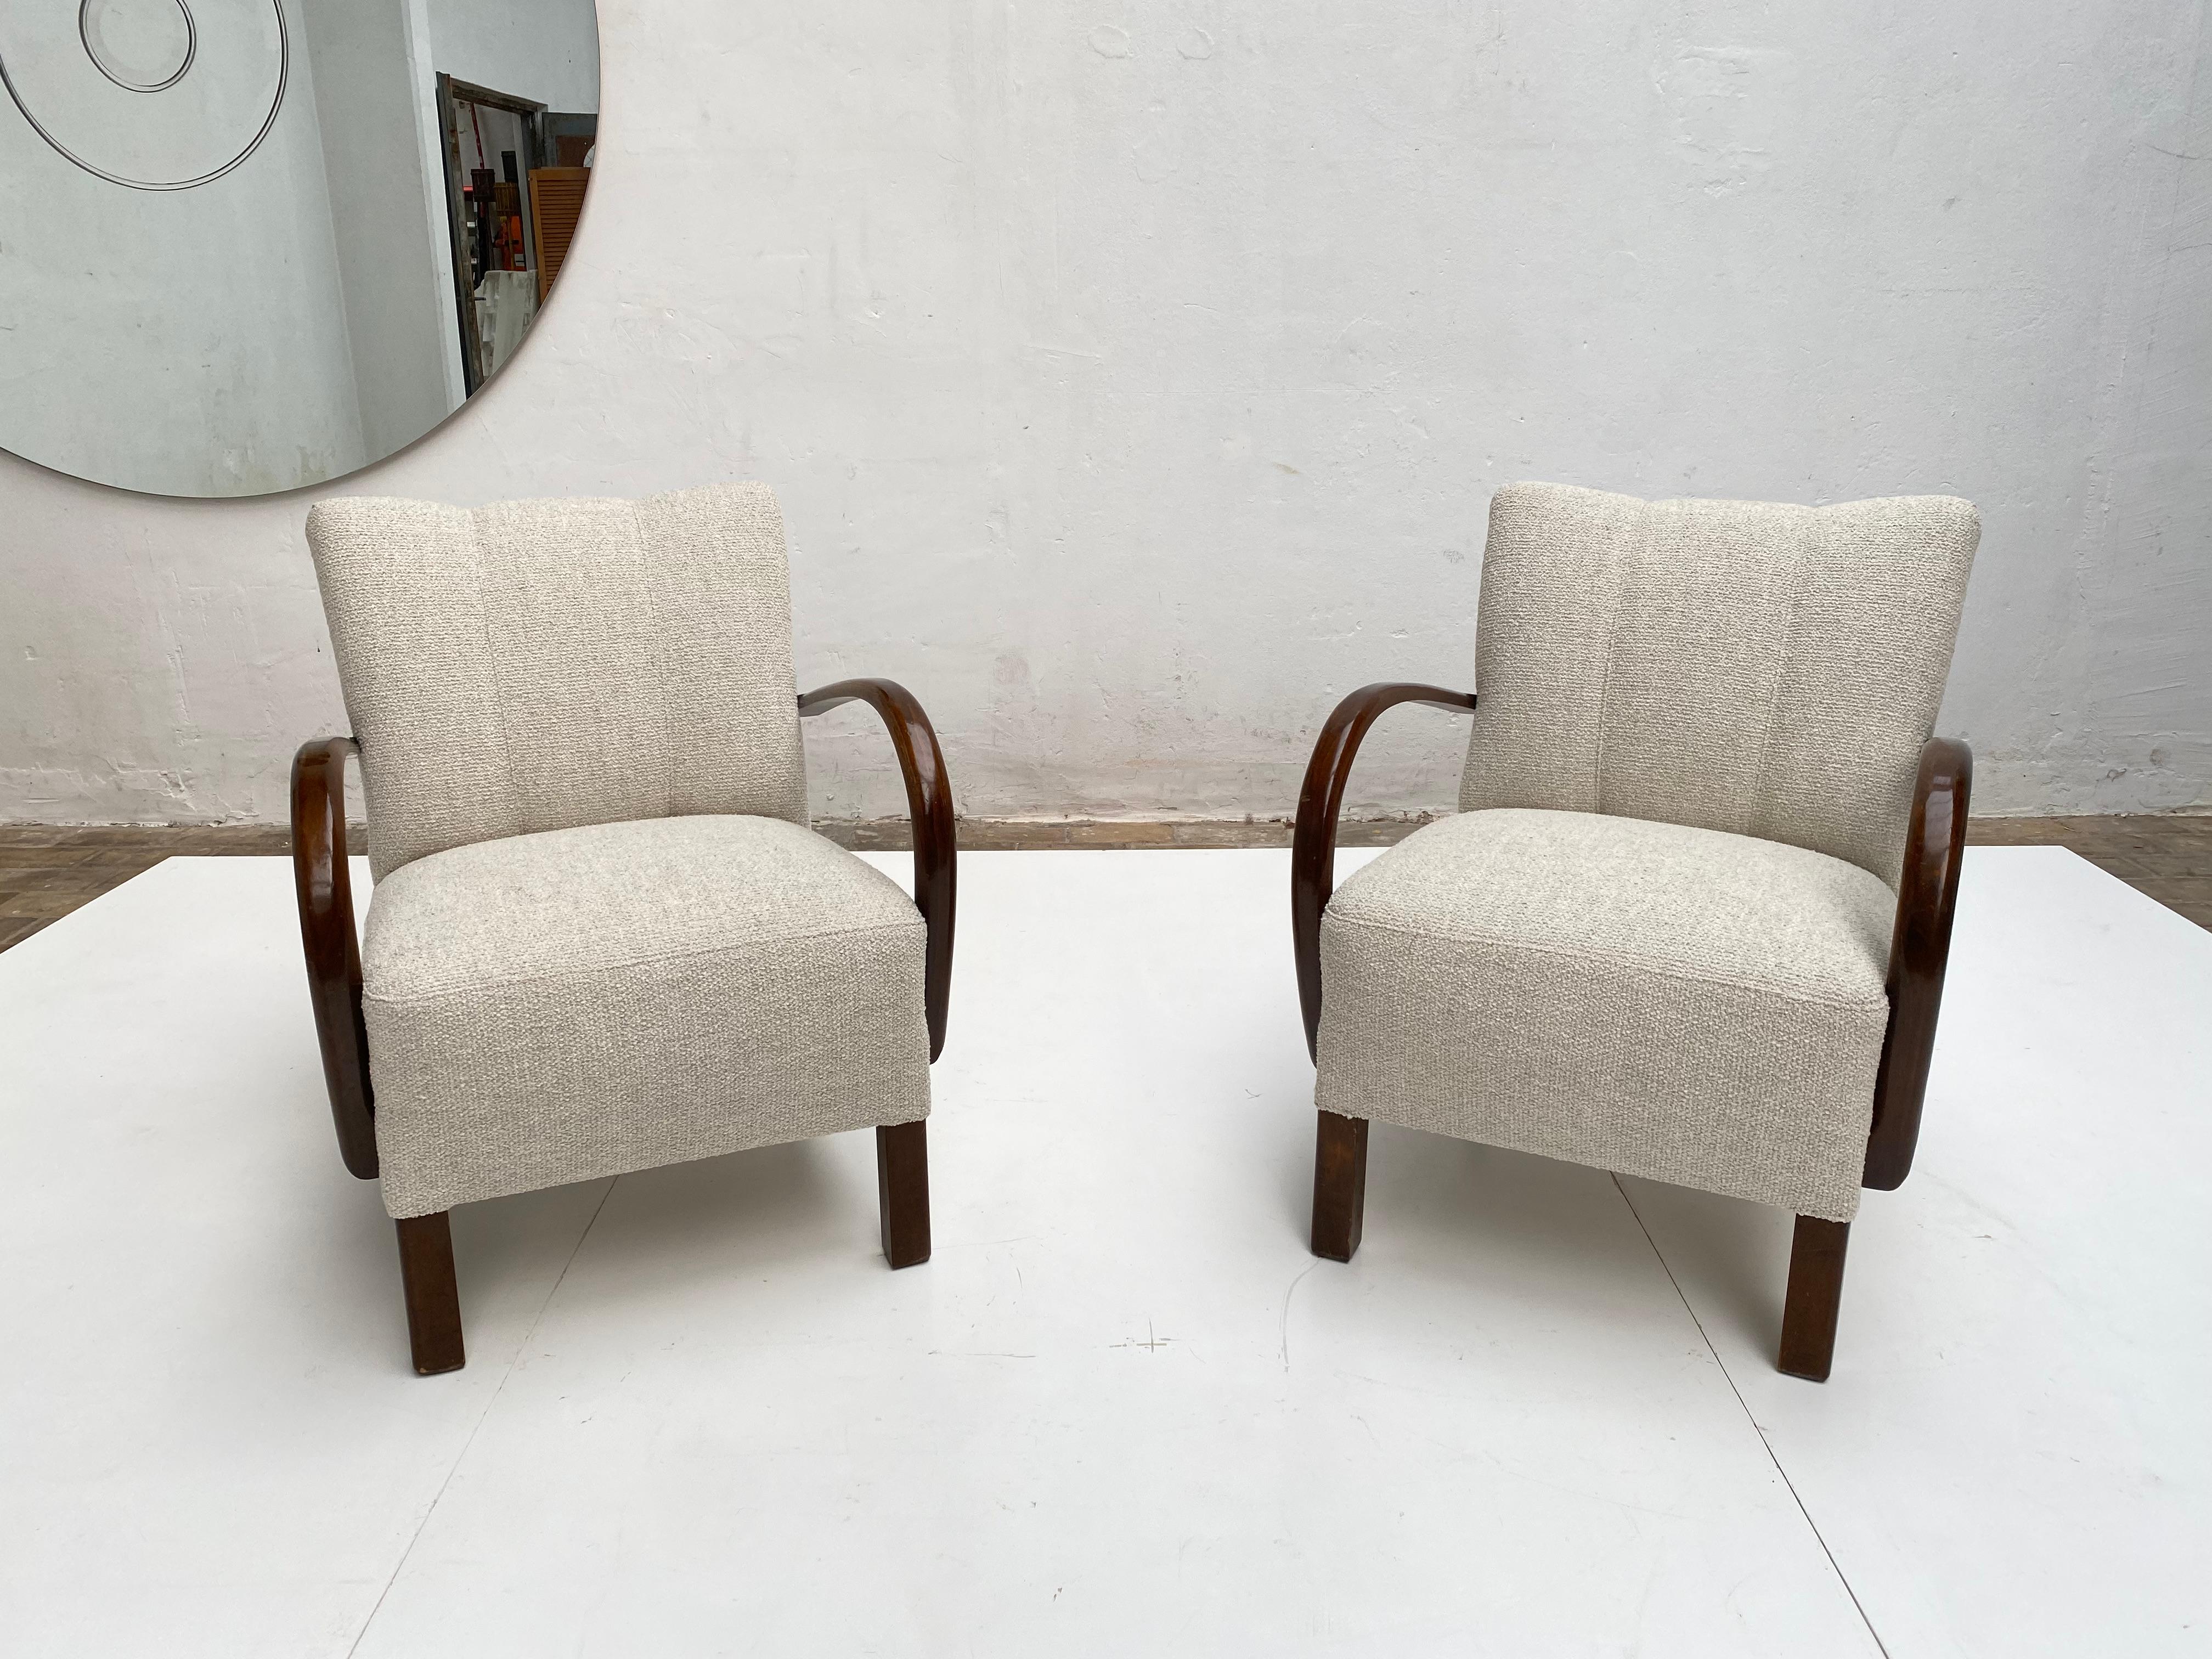 Pair of Dutch 1950's Hawema Lounge Chairs Restored with New Upholstery 1